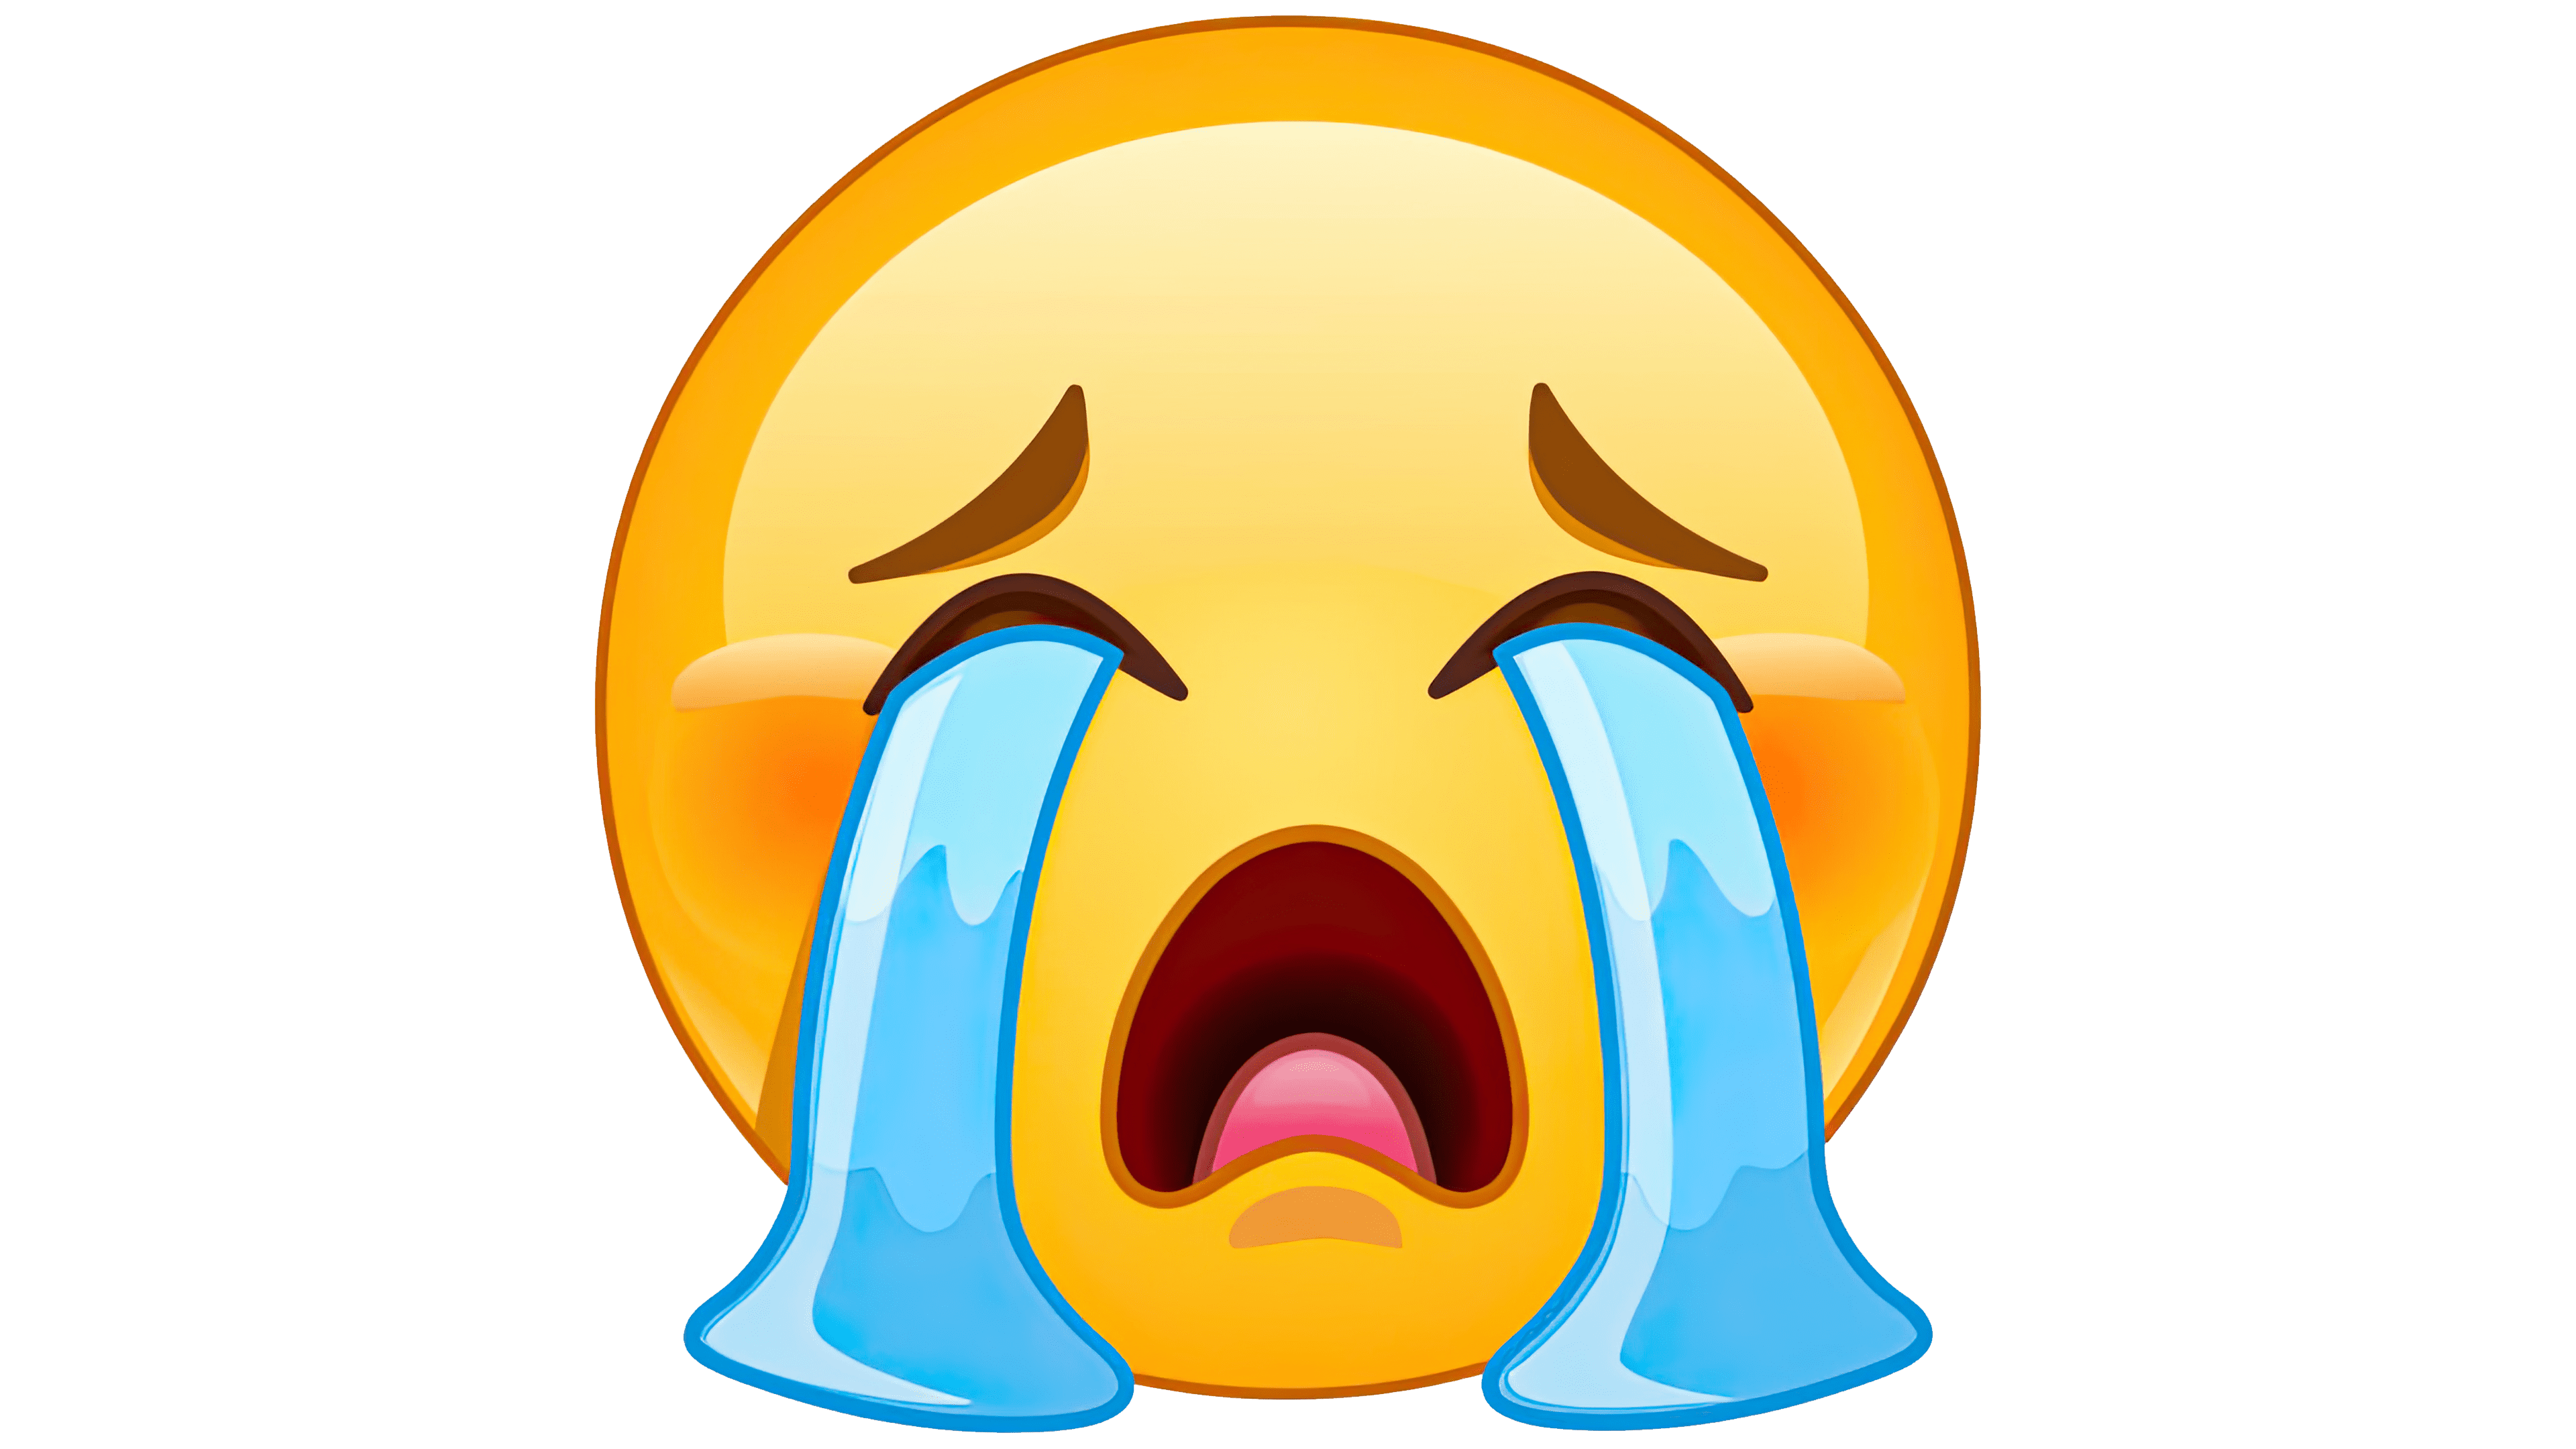 Crying Emoji - what it means and how to use it